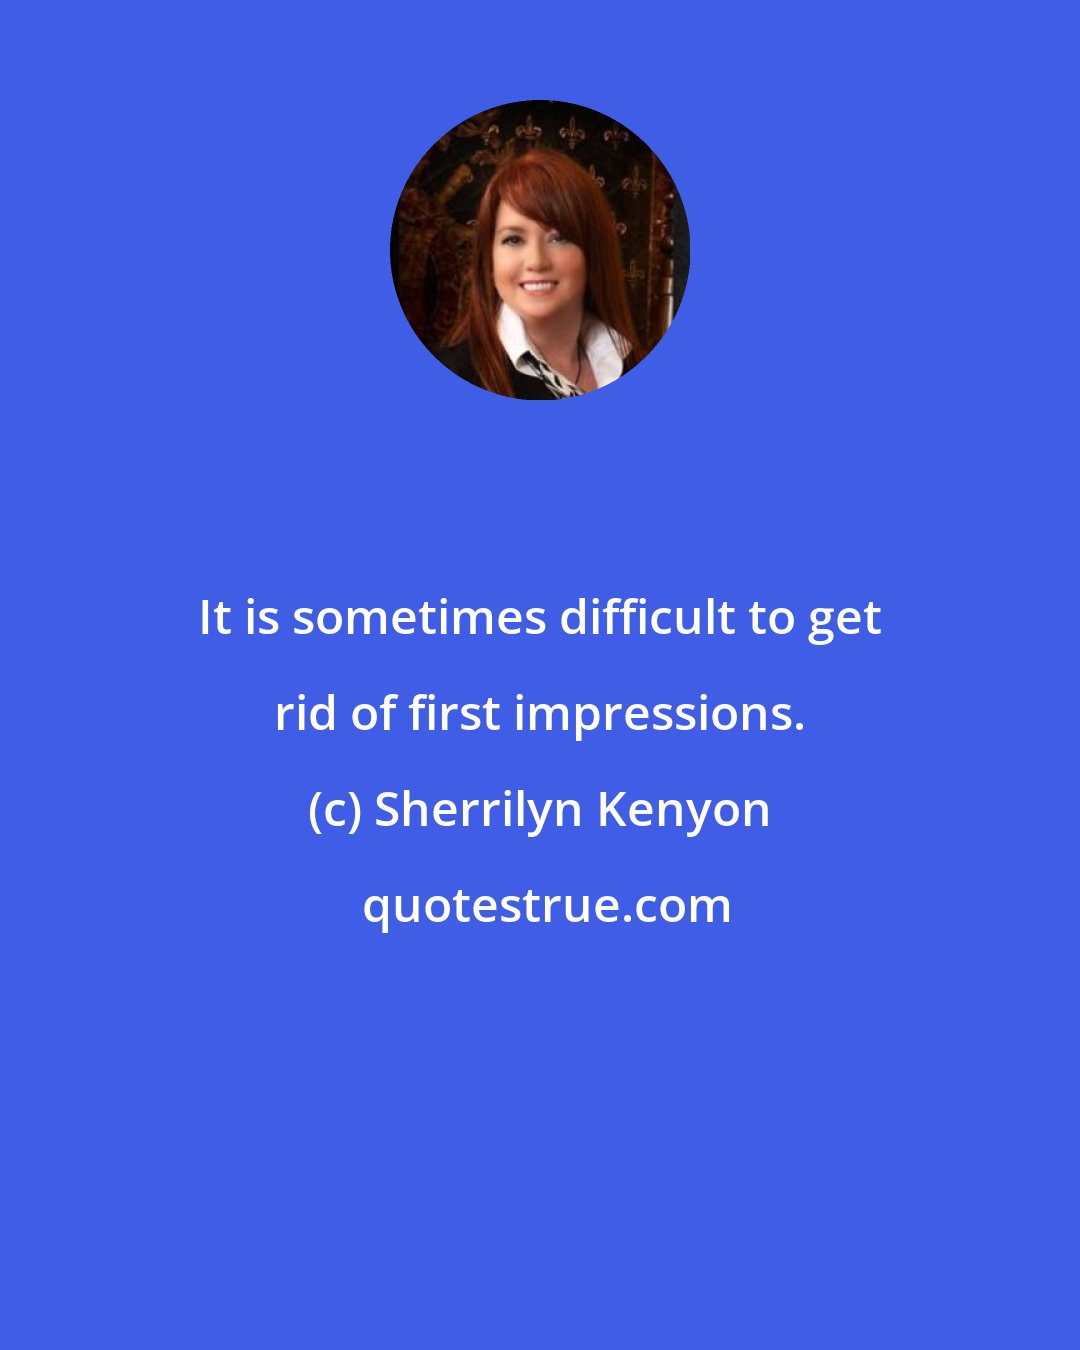 Sherrilyn Kenyon: It is sometimes difficult to get rid of first impressions.